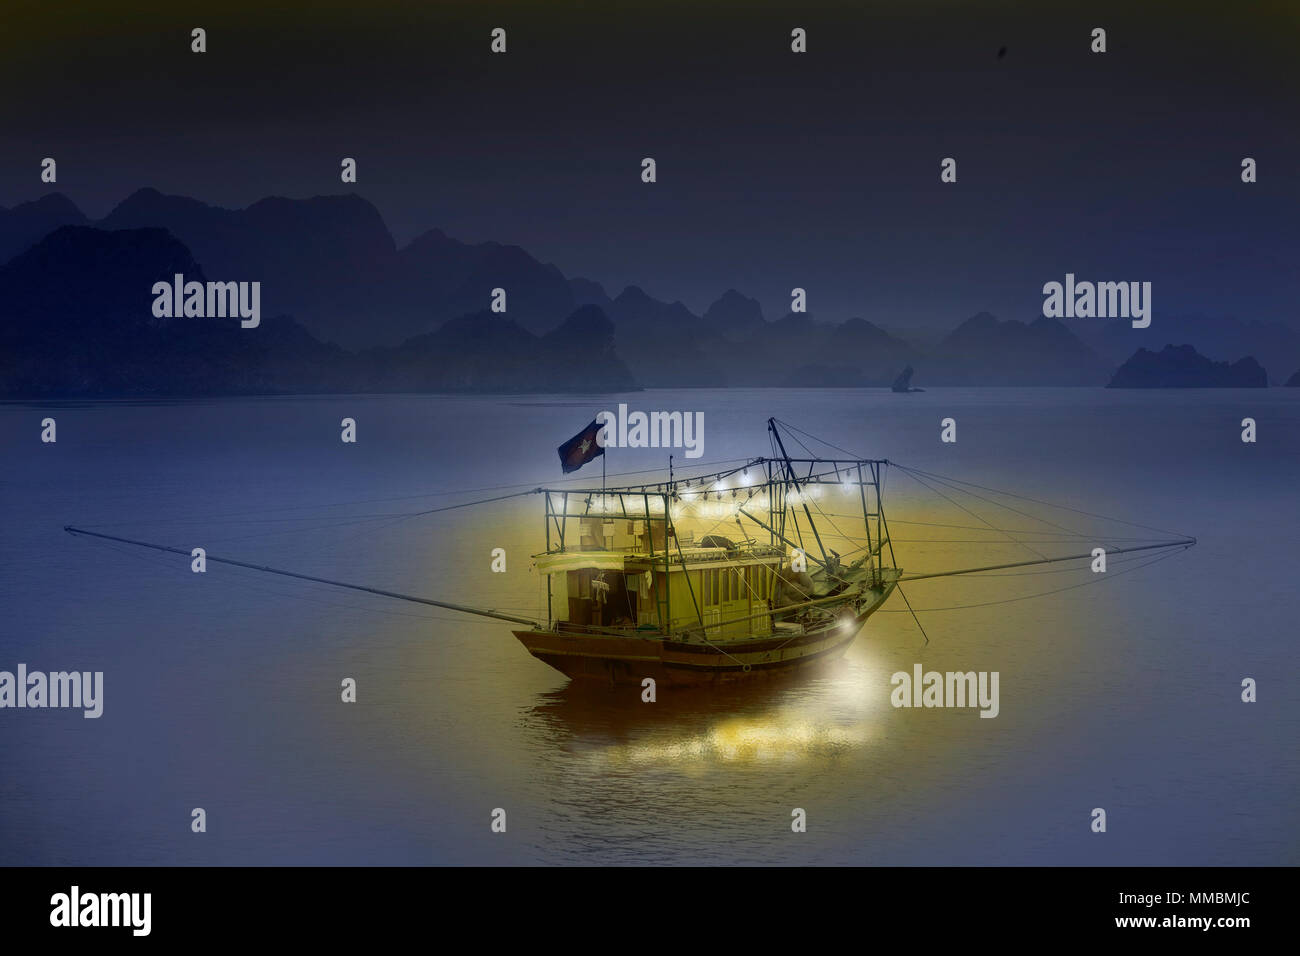 https://c8.alamy.com/comp/MMBMJC/vietnamese-squid-fishing-boat-late-evening-lights-are-used-to-attract-the-squid-to-the-surface-halong-bay-vietnam-MMBMJC.jpg